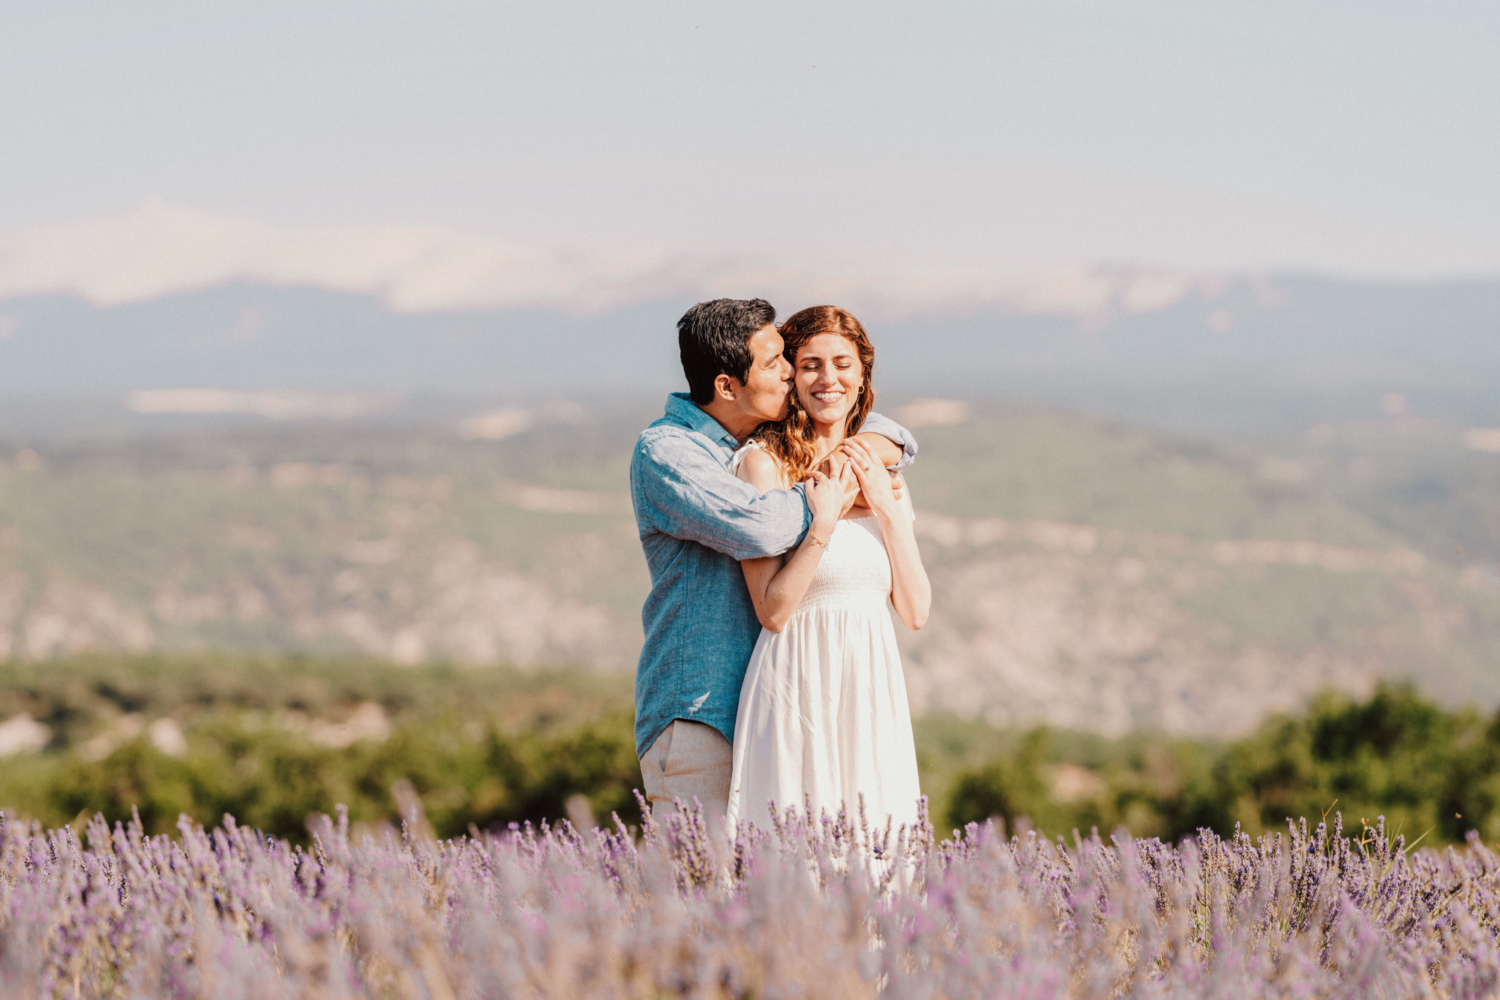 man kisses woman on side of face in lavender field